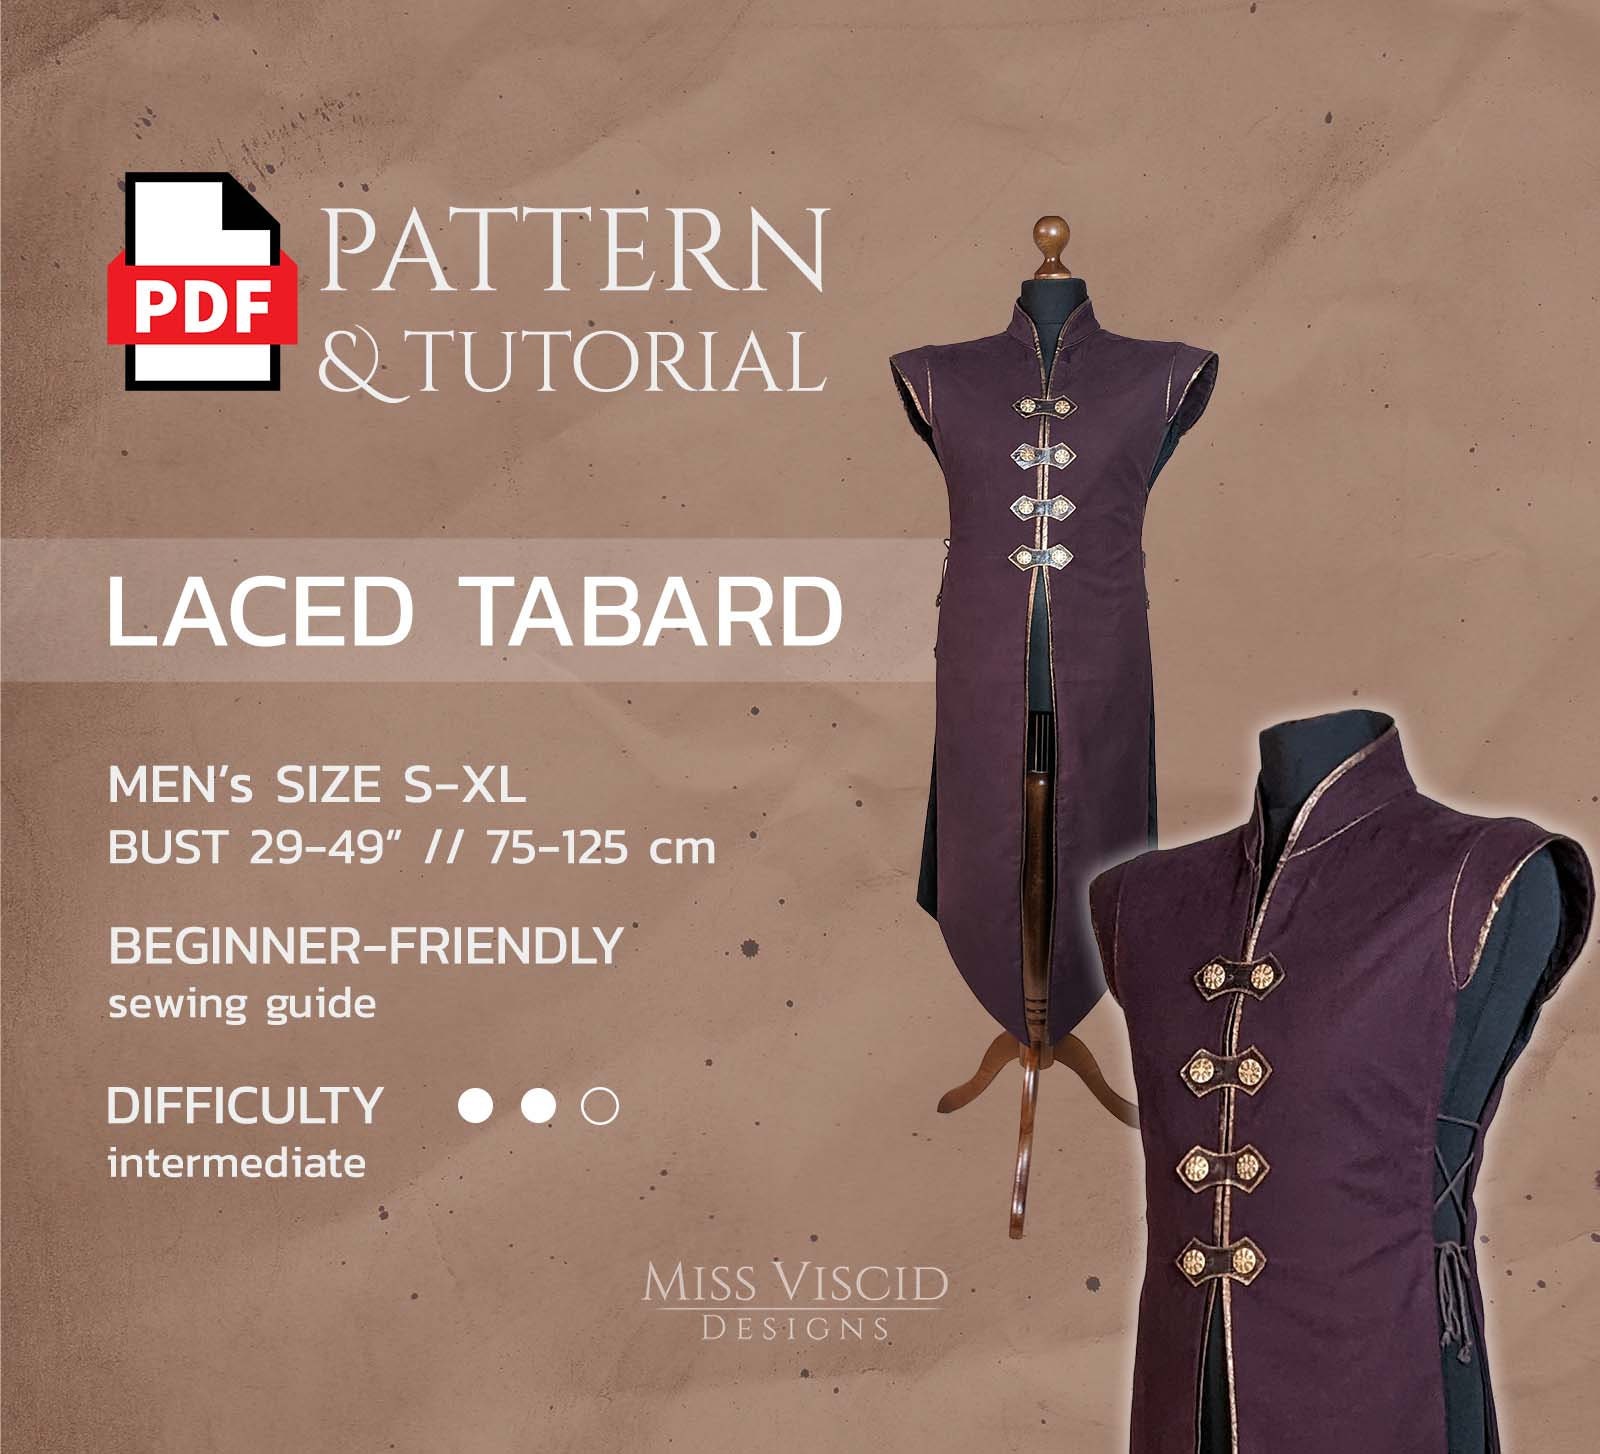 Men's Fantasy Tabard Vest With Lacing PDF Pattern for 